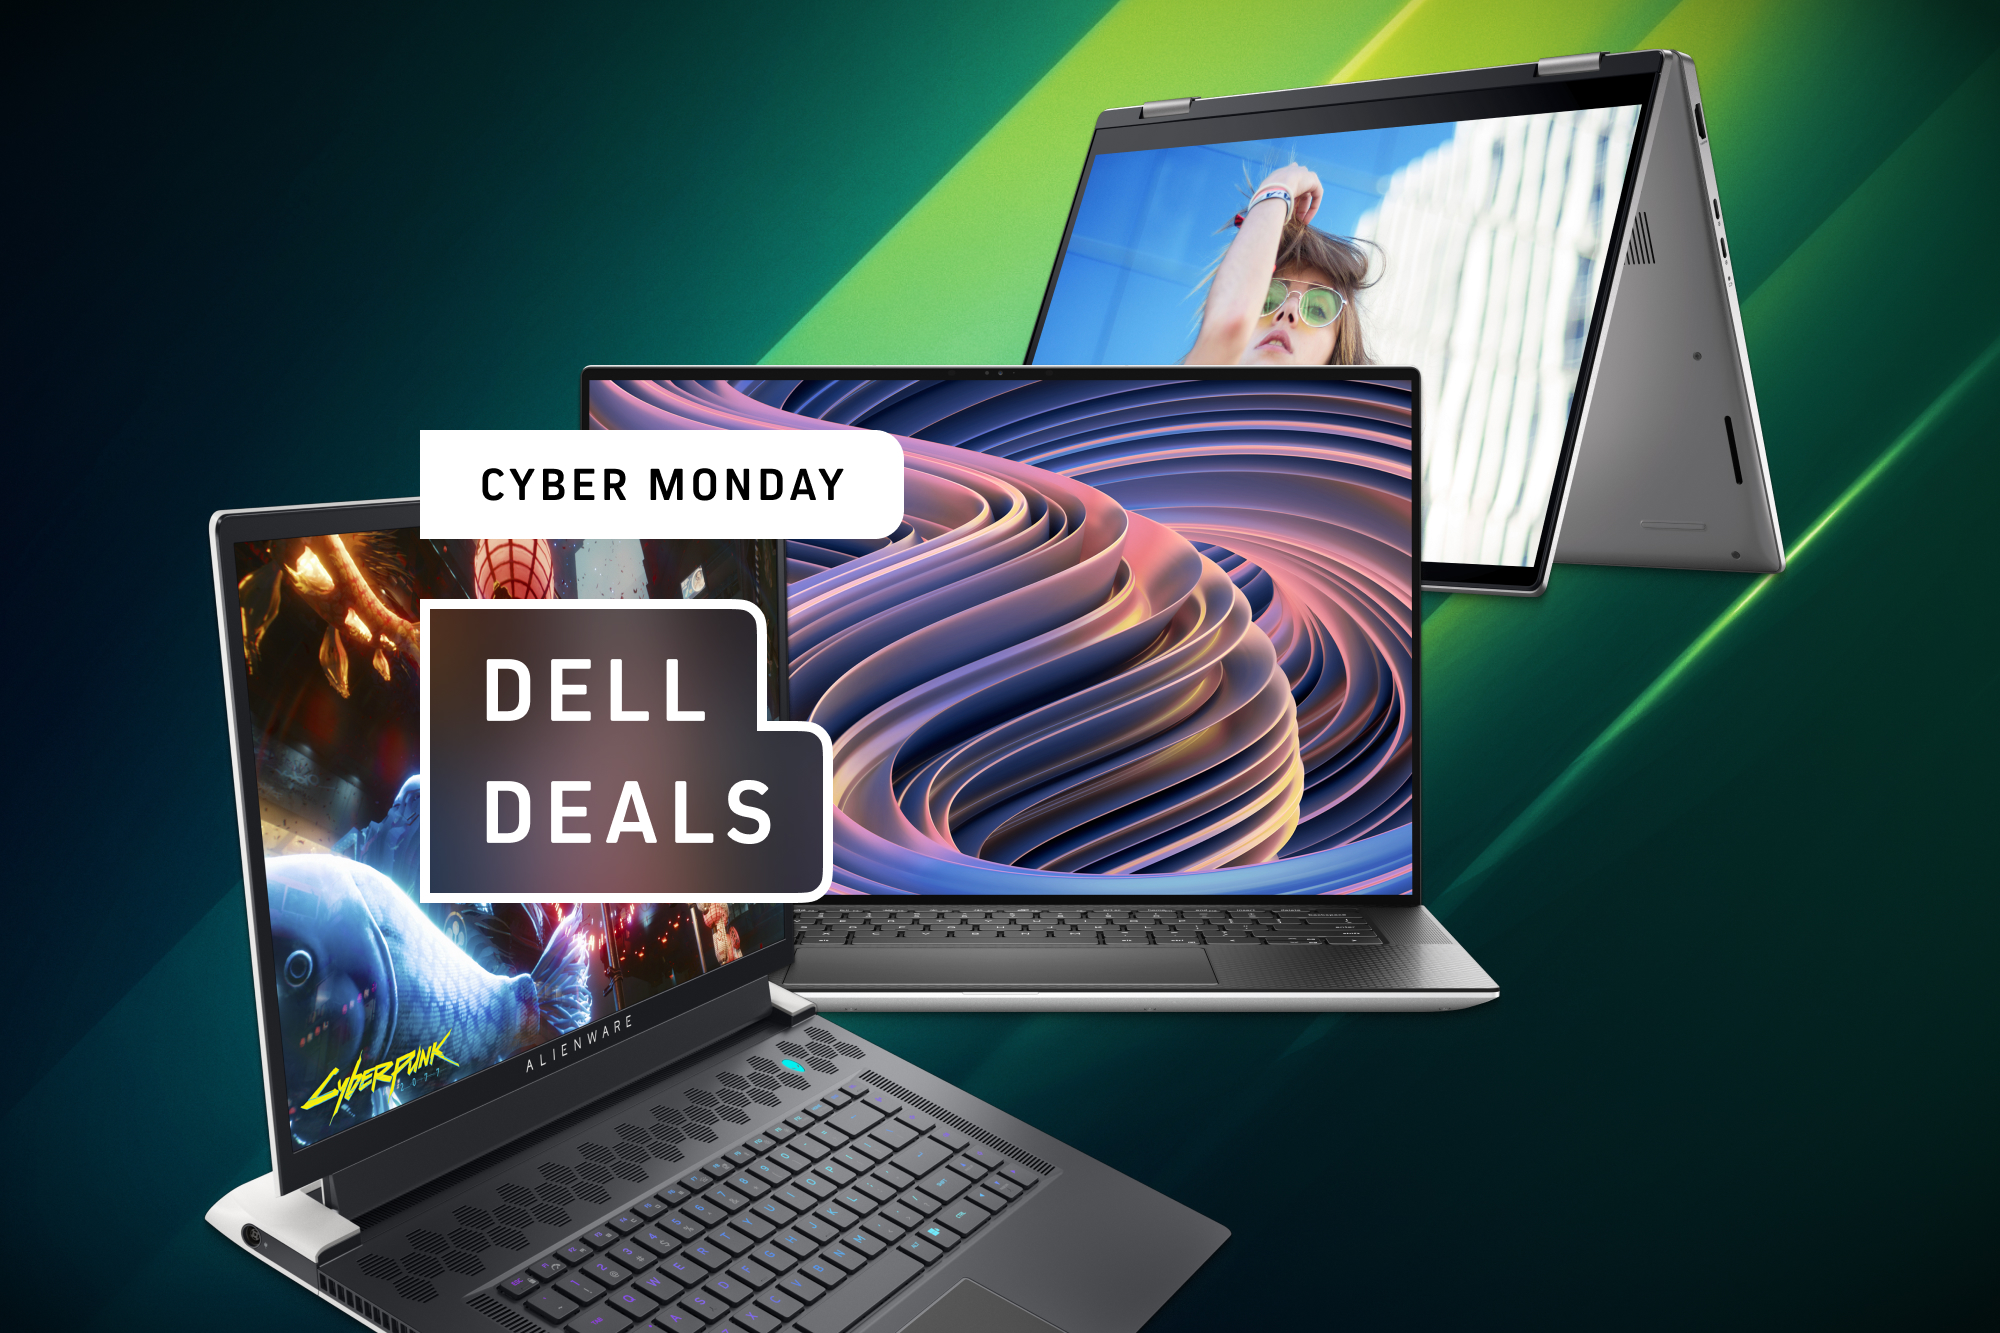 Dell Cyber Monday deals: Save on Dell XPS 13, gaming
laptops, and more